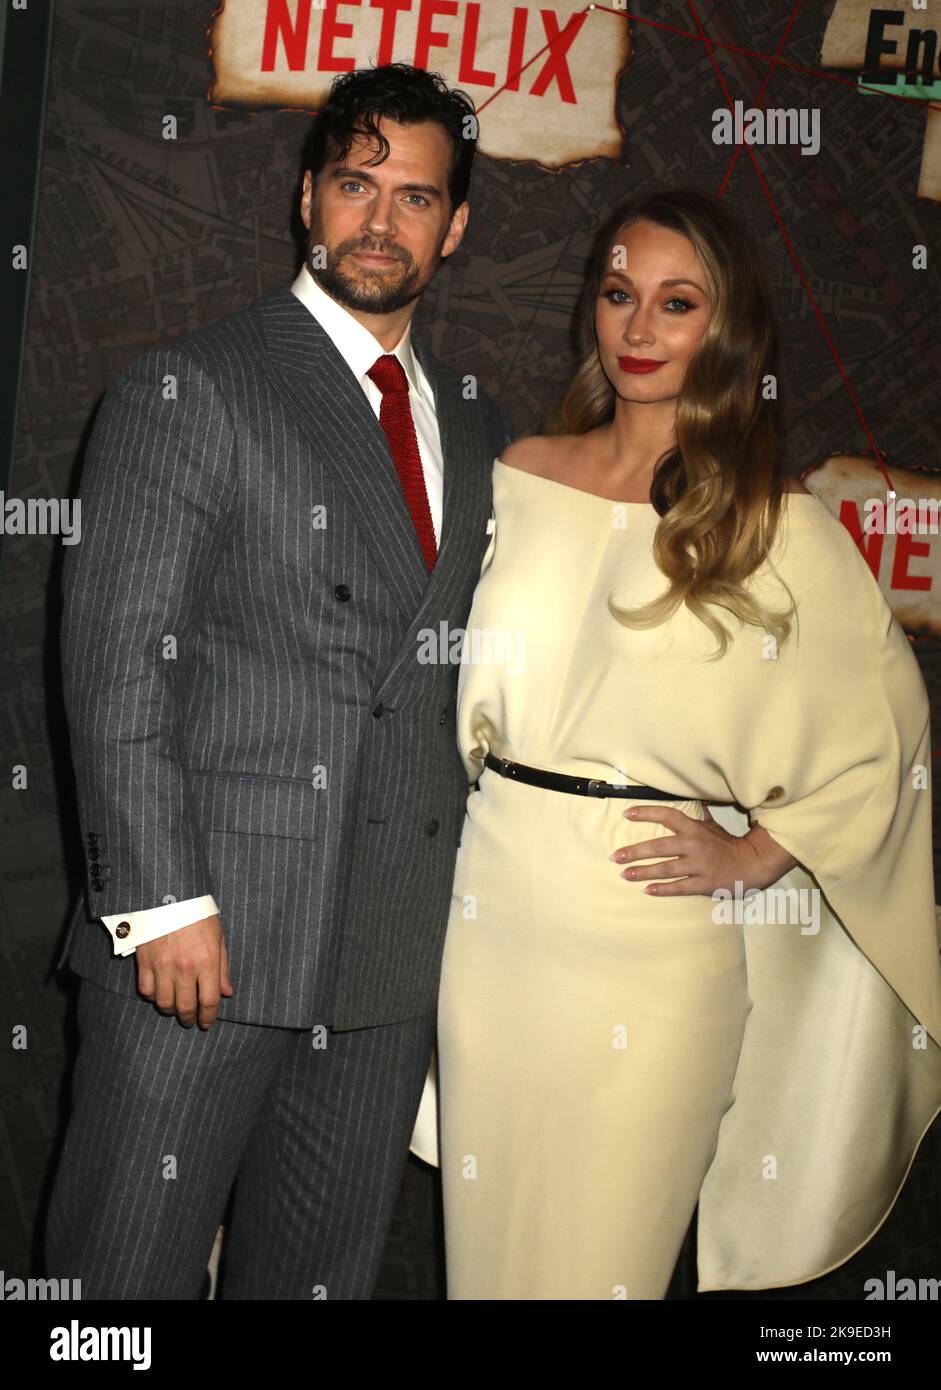 Actor Henry Cavill, left, and girlfriend Natalie Viscuso attend the world  premiere of Enola Holmes 2 at The Paris Theater on Thursday, Oct. 27,  2022, in New York. (Photo by Evan Agostini/Invision/AP